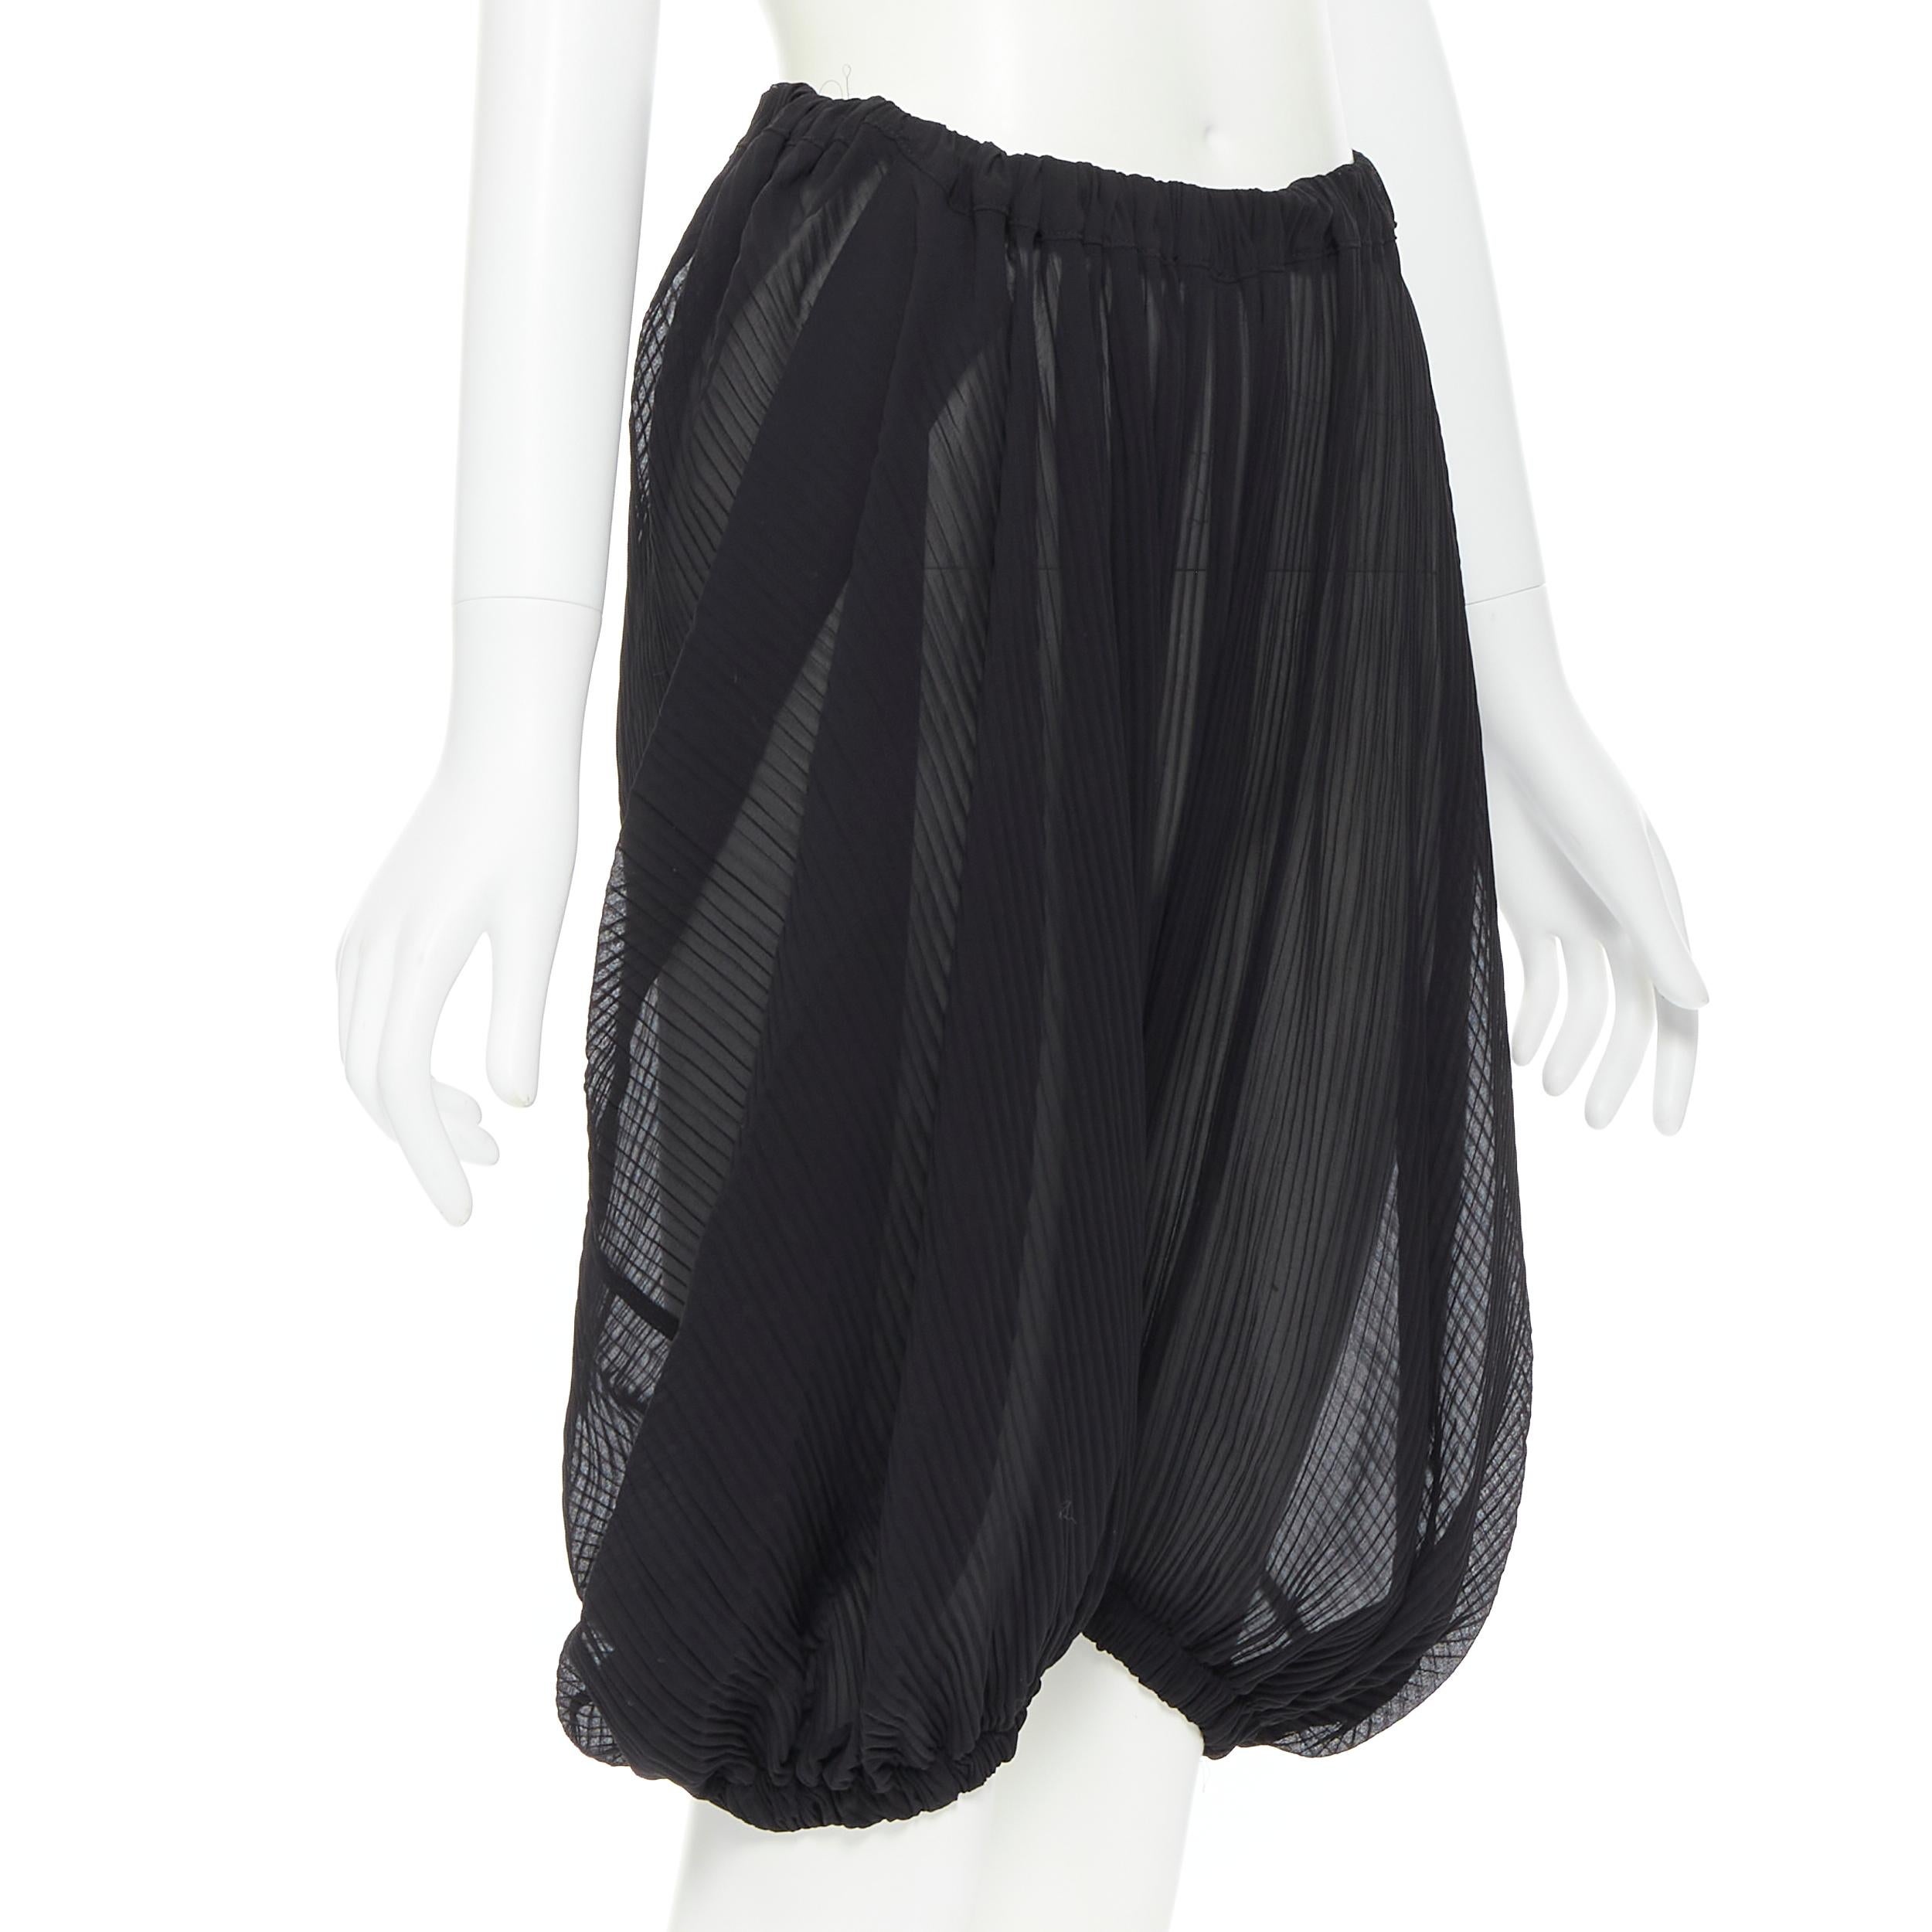 Black new TAO COMME DES GARCONS black sheer pleated bubble elasticated shorts XS